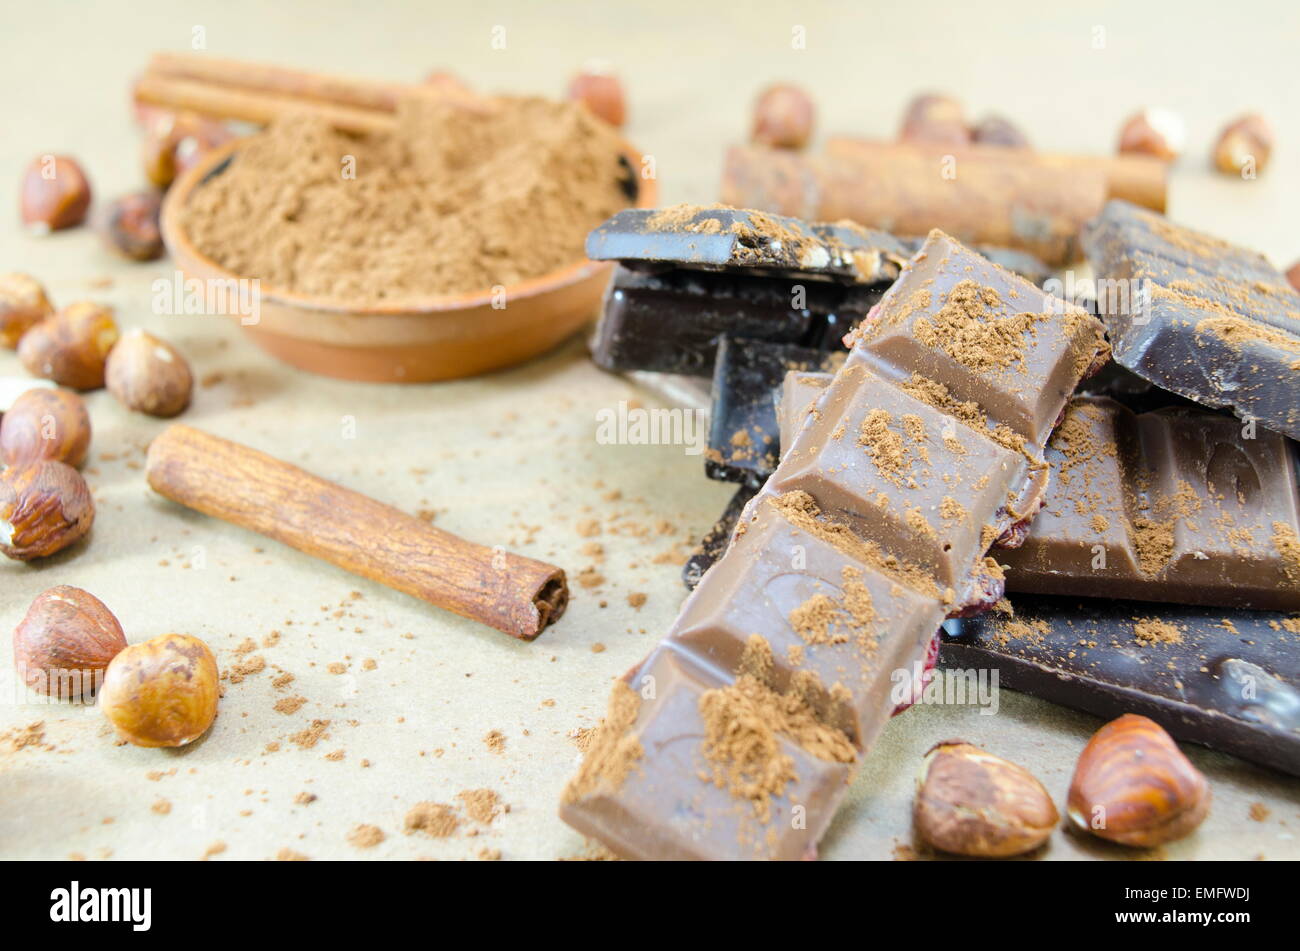 Bunch of chocolate sticks, cinnamon and hazelnuts on a table Stock Photo